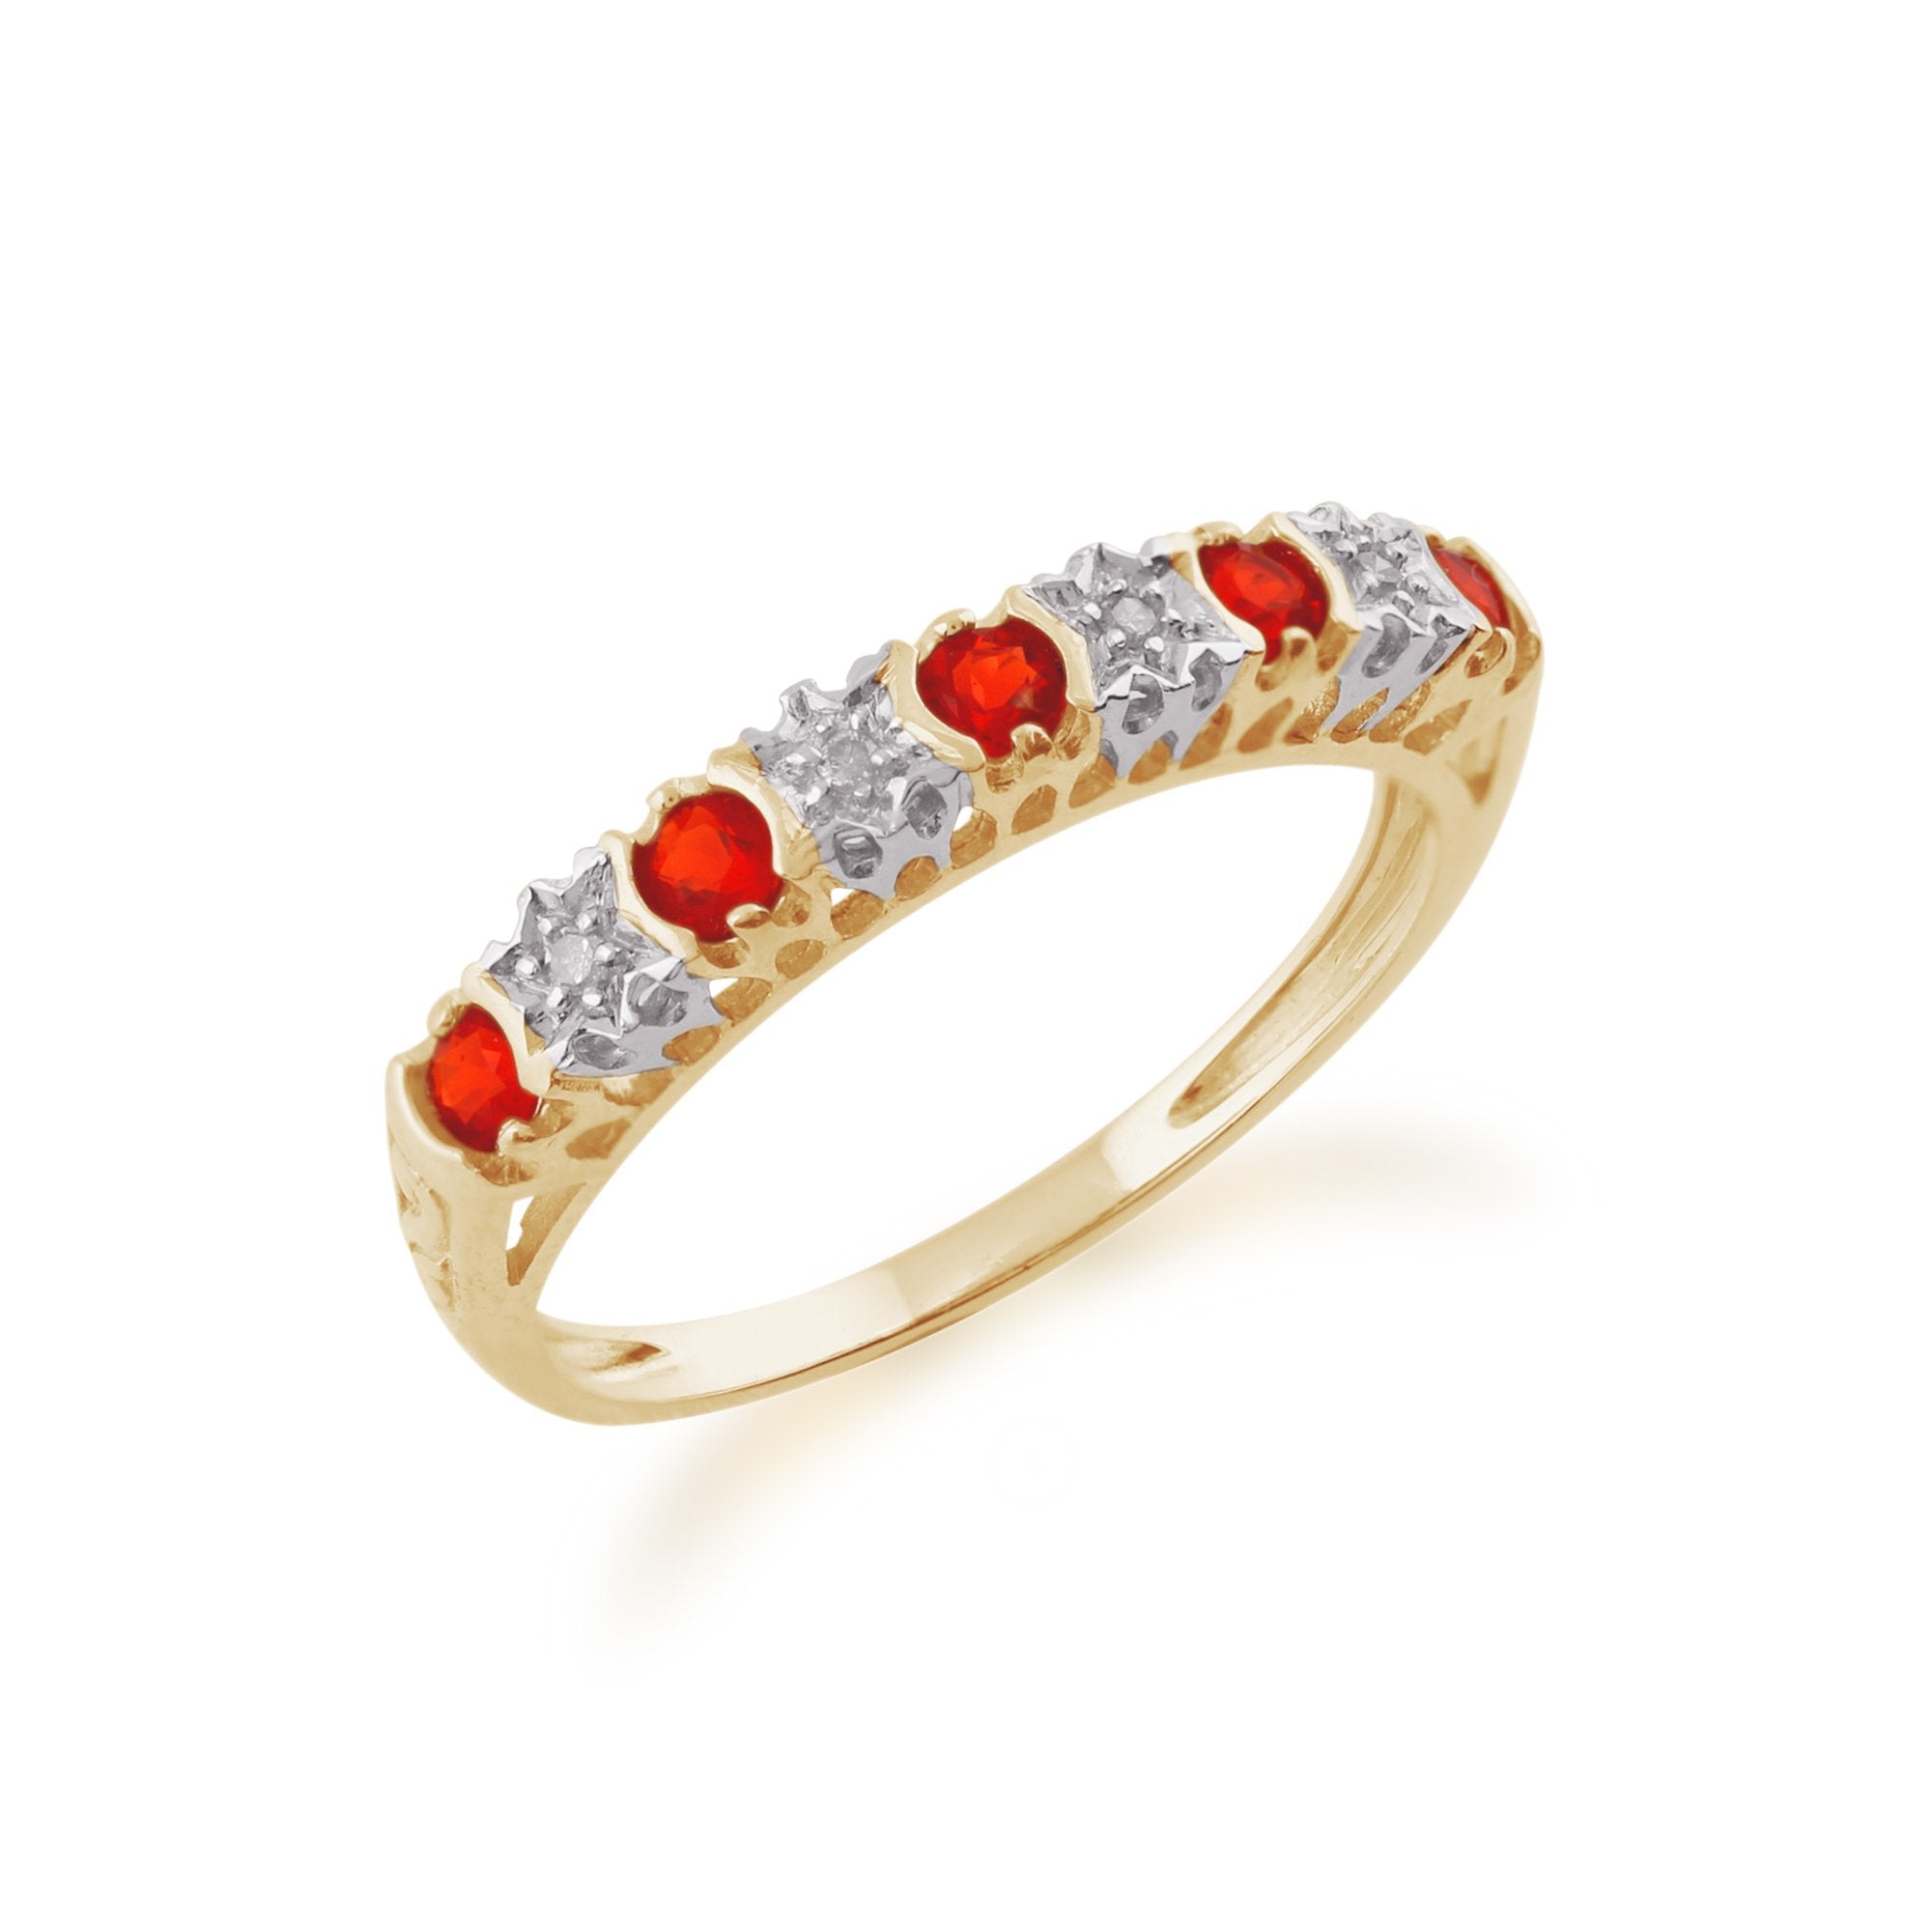 Round Fire Opal & Diamond Ring in 9ct Gold